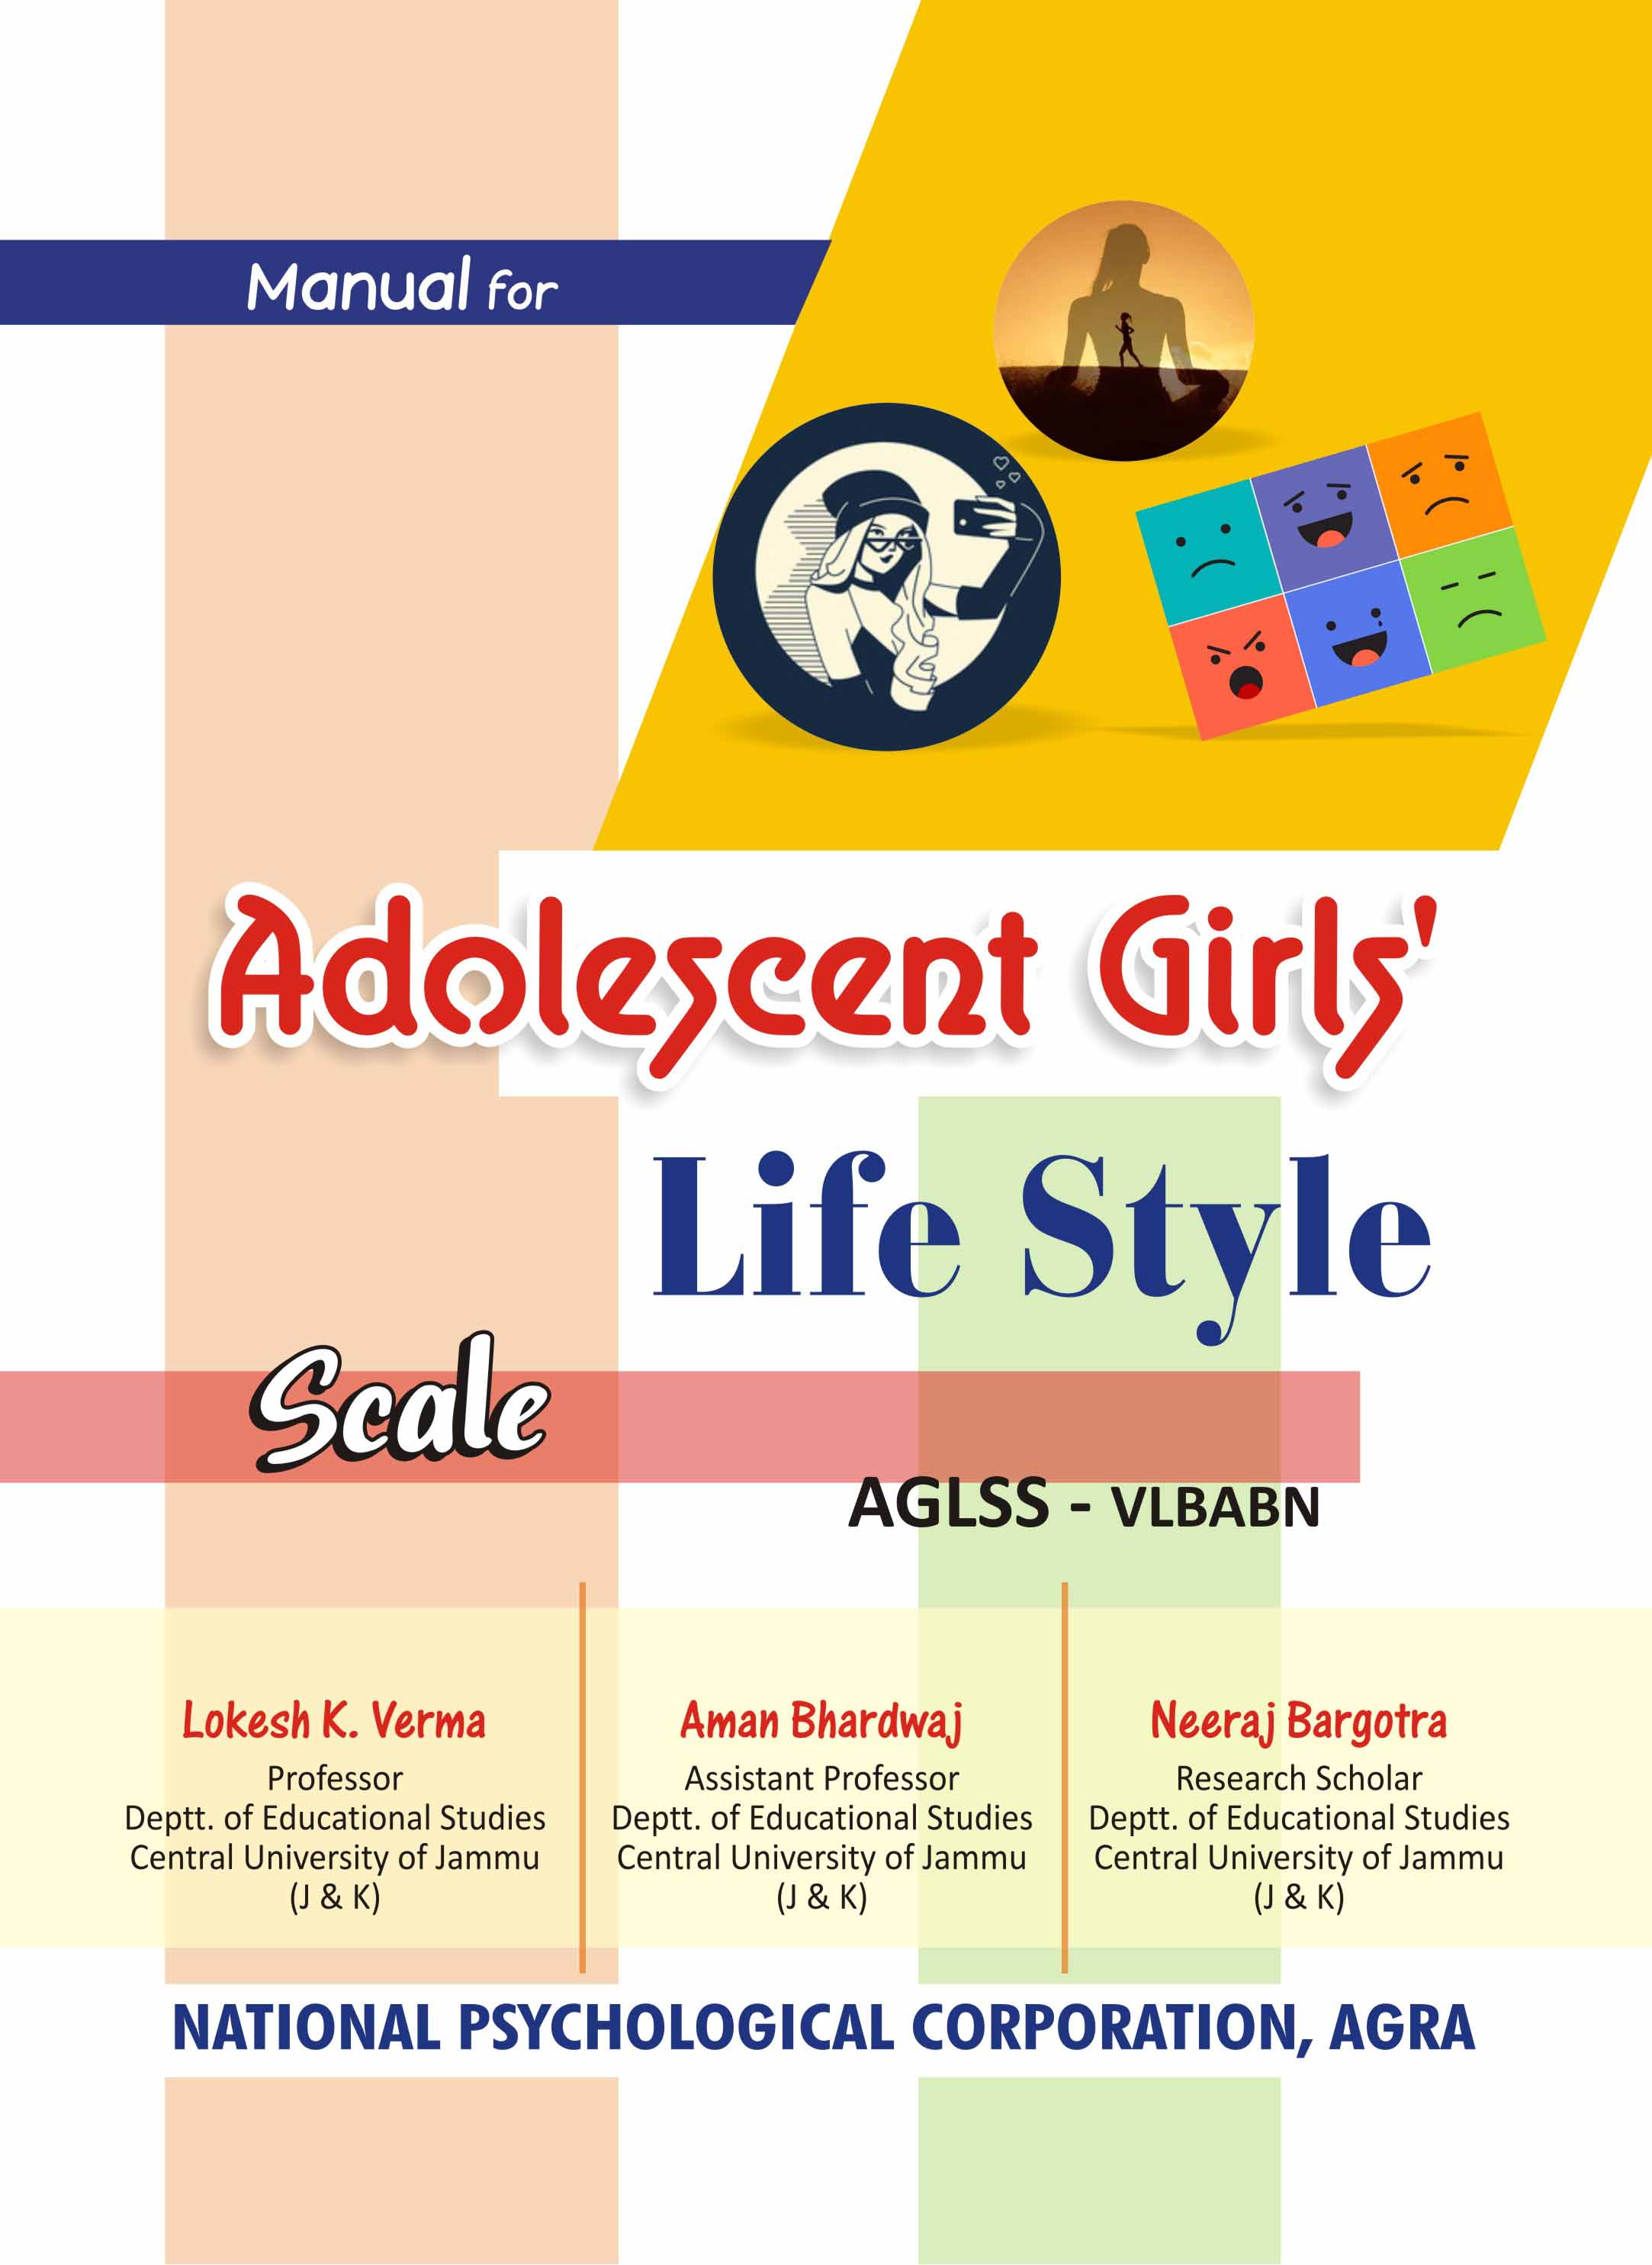 ADOLESCENT-GIRLS-LIFE-STYLE-SCALE